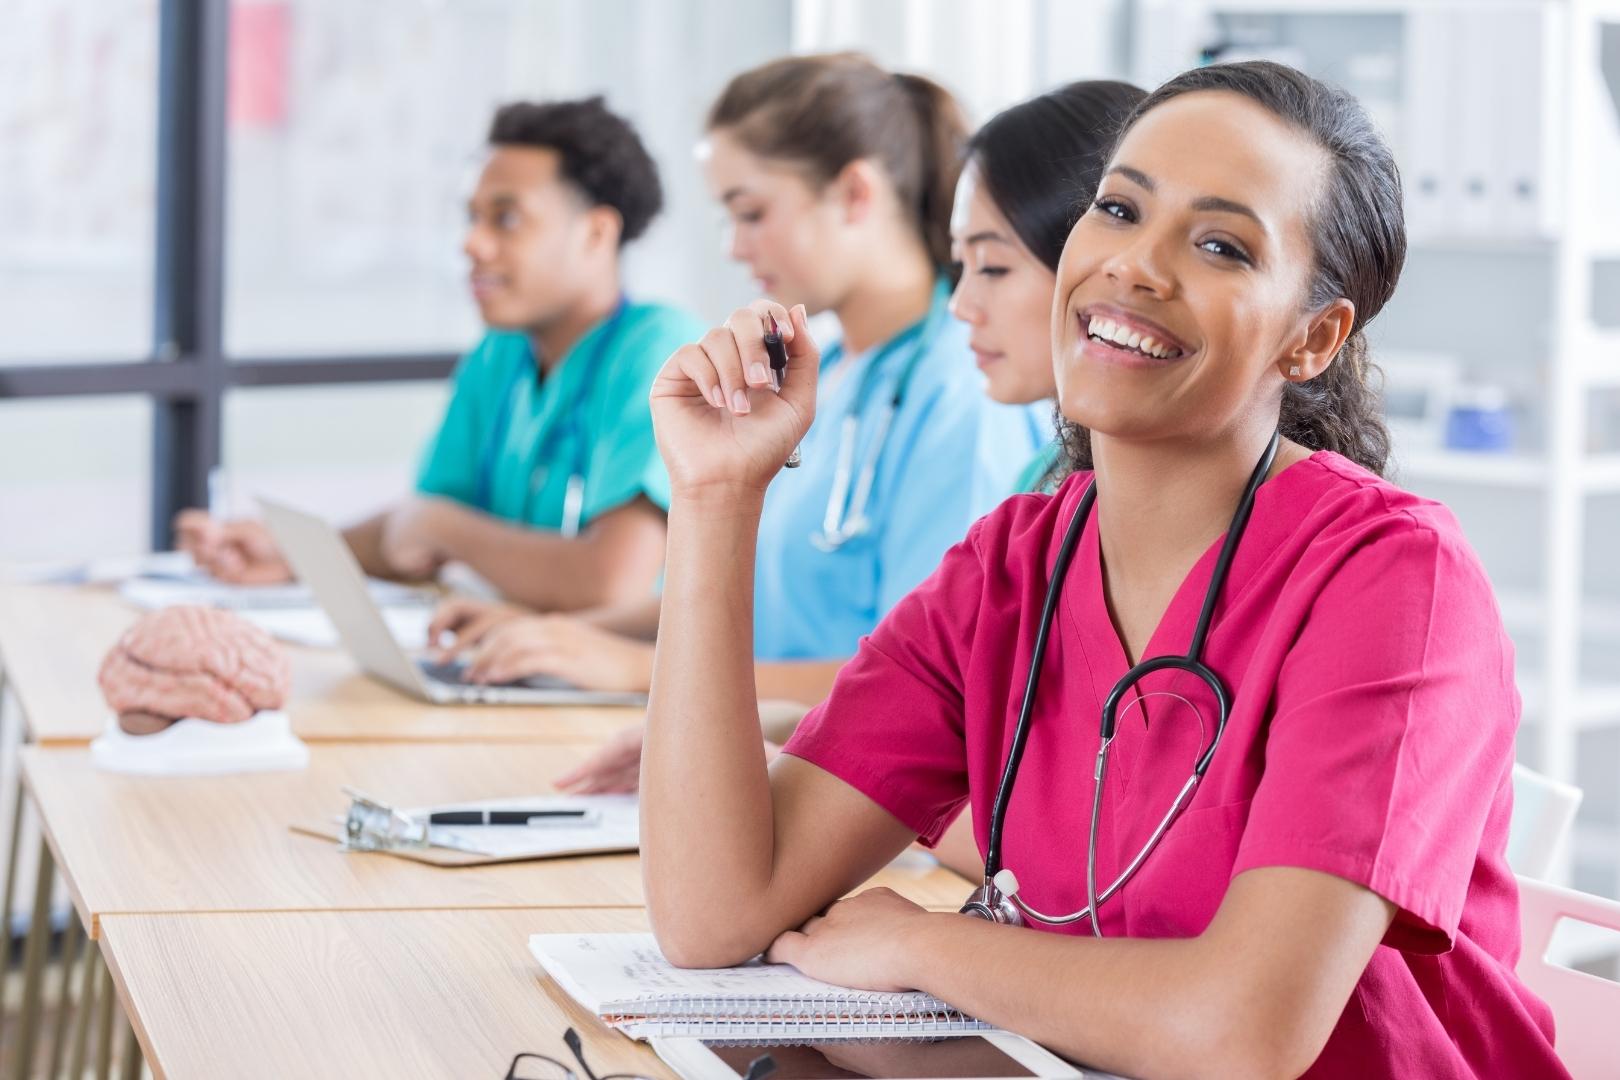 What is the Women's Health Nurse Practitioner Salary?